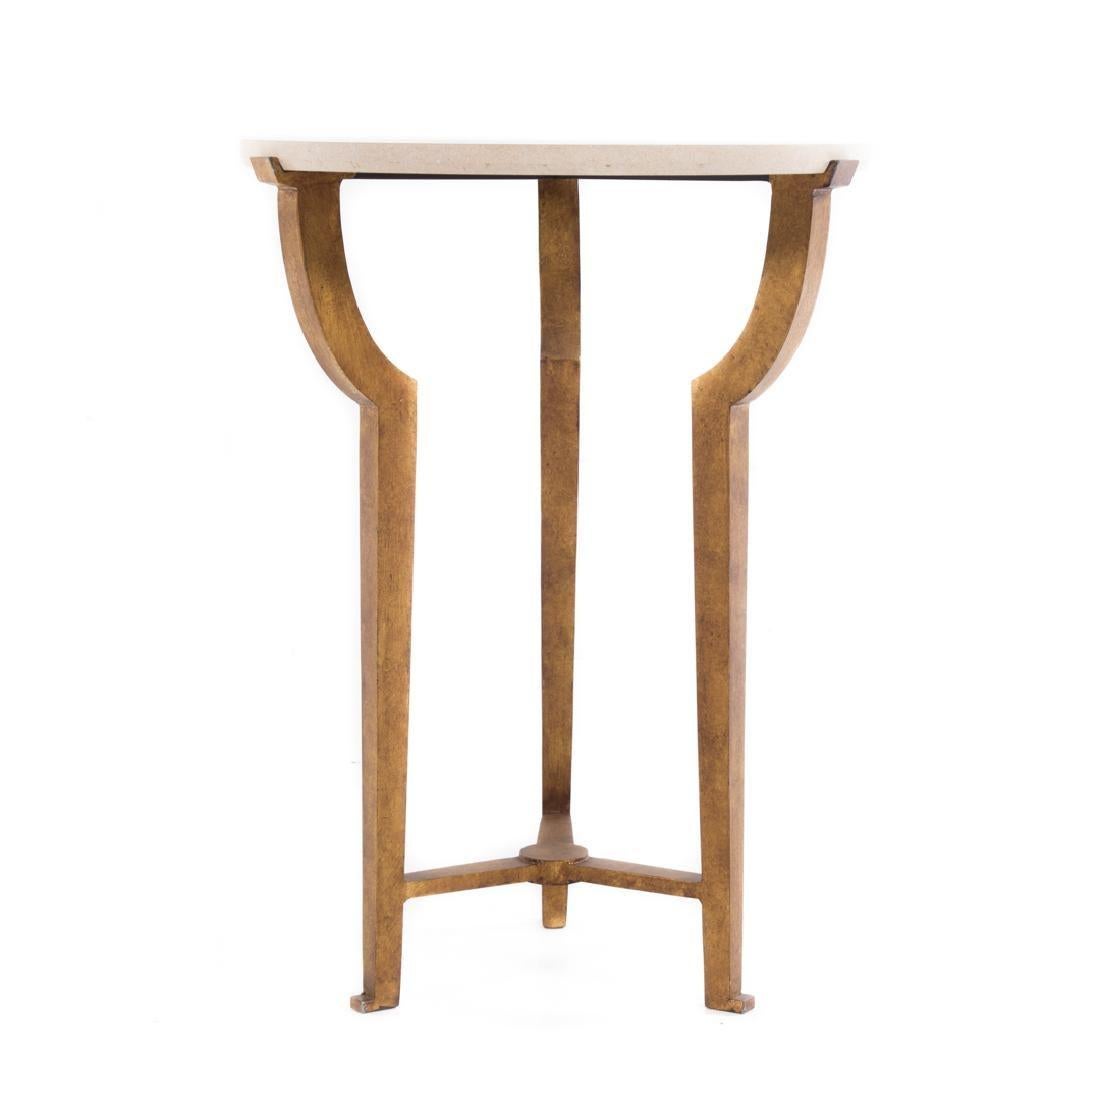 A round side table with a travertine top rests on a trefoil iron gilt base. The base supports bow out at the top in a trefoil design, and then taper into straight legs with pad feet. A center support anchors the table at the bottom. The dimensions